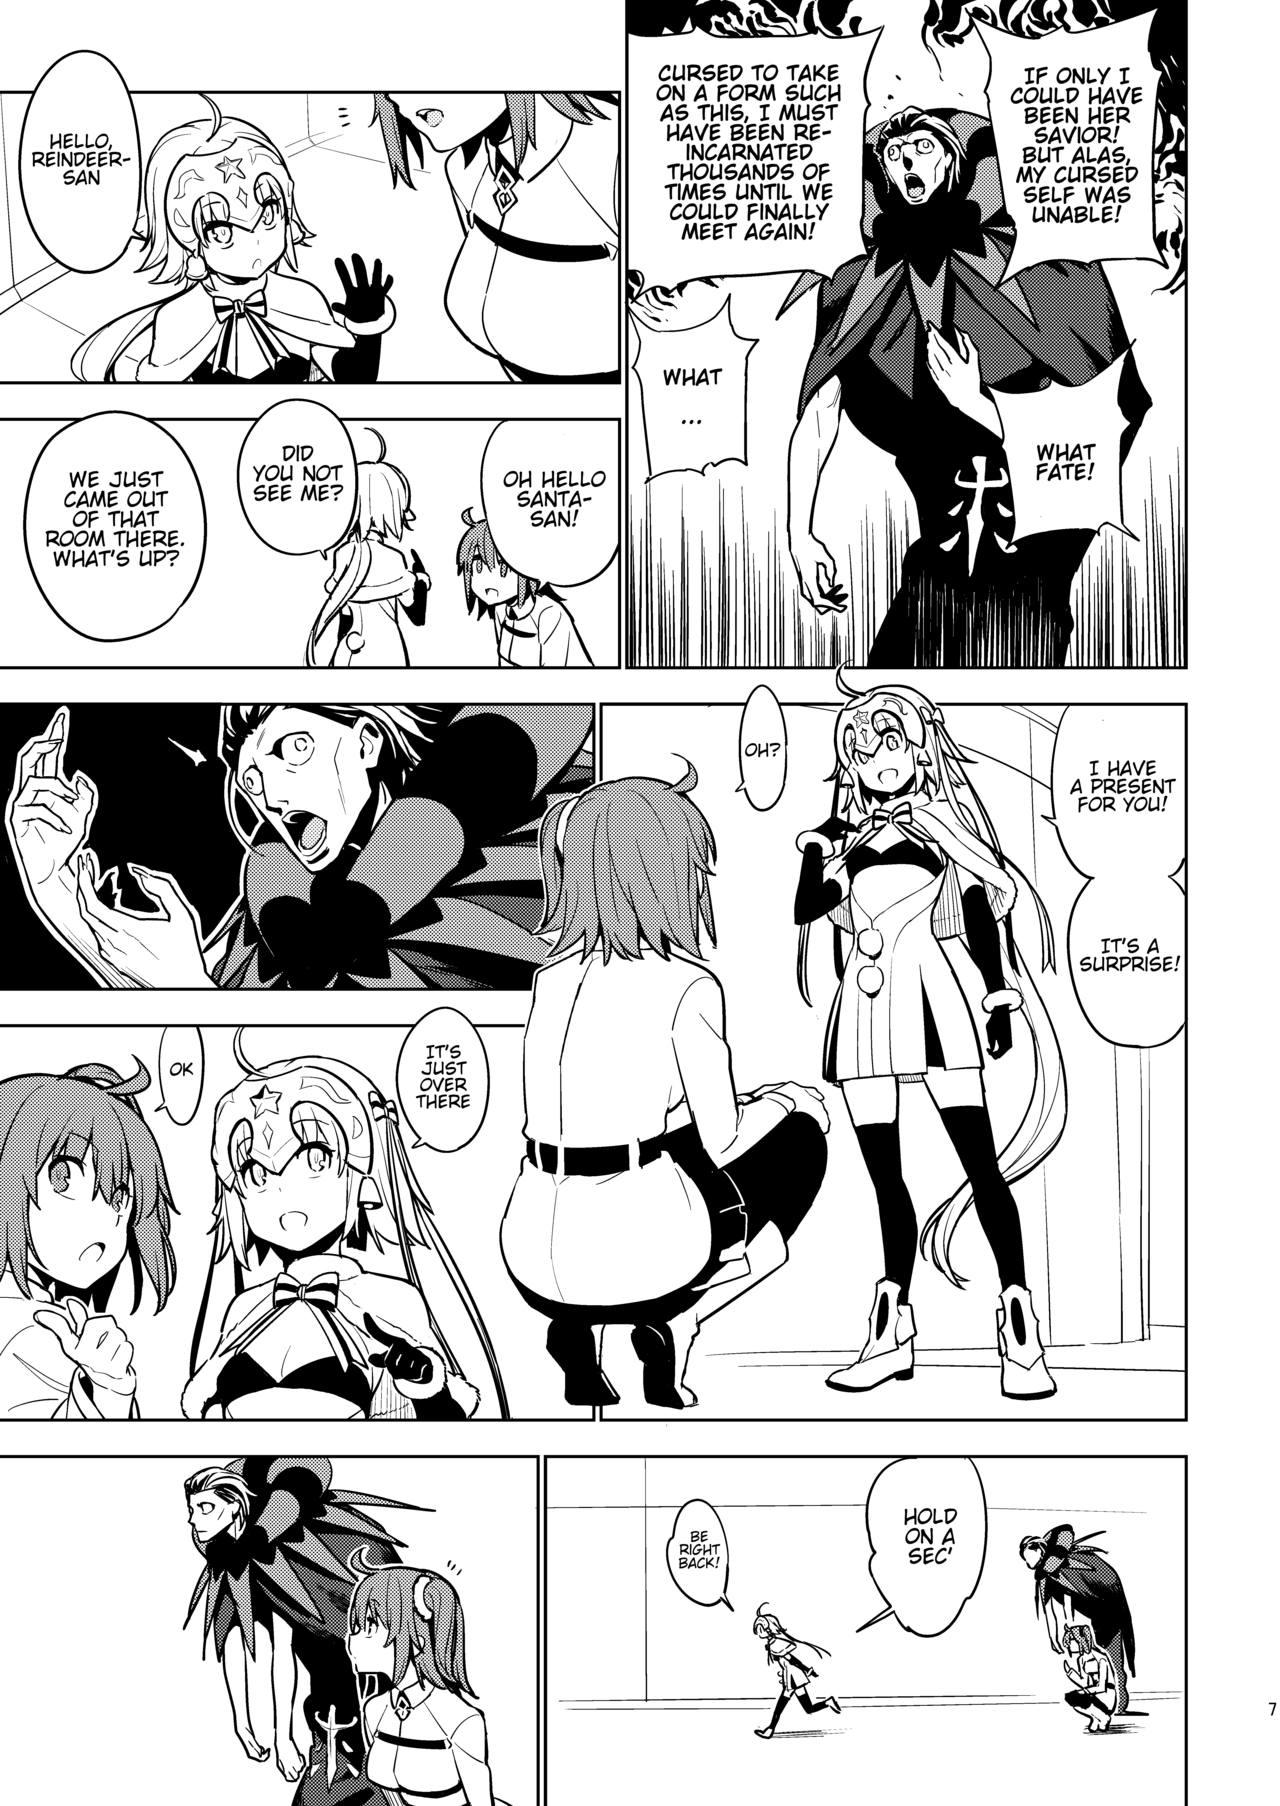 Indonesia SO BORED - Fate grand order Stunning - Page 5